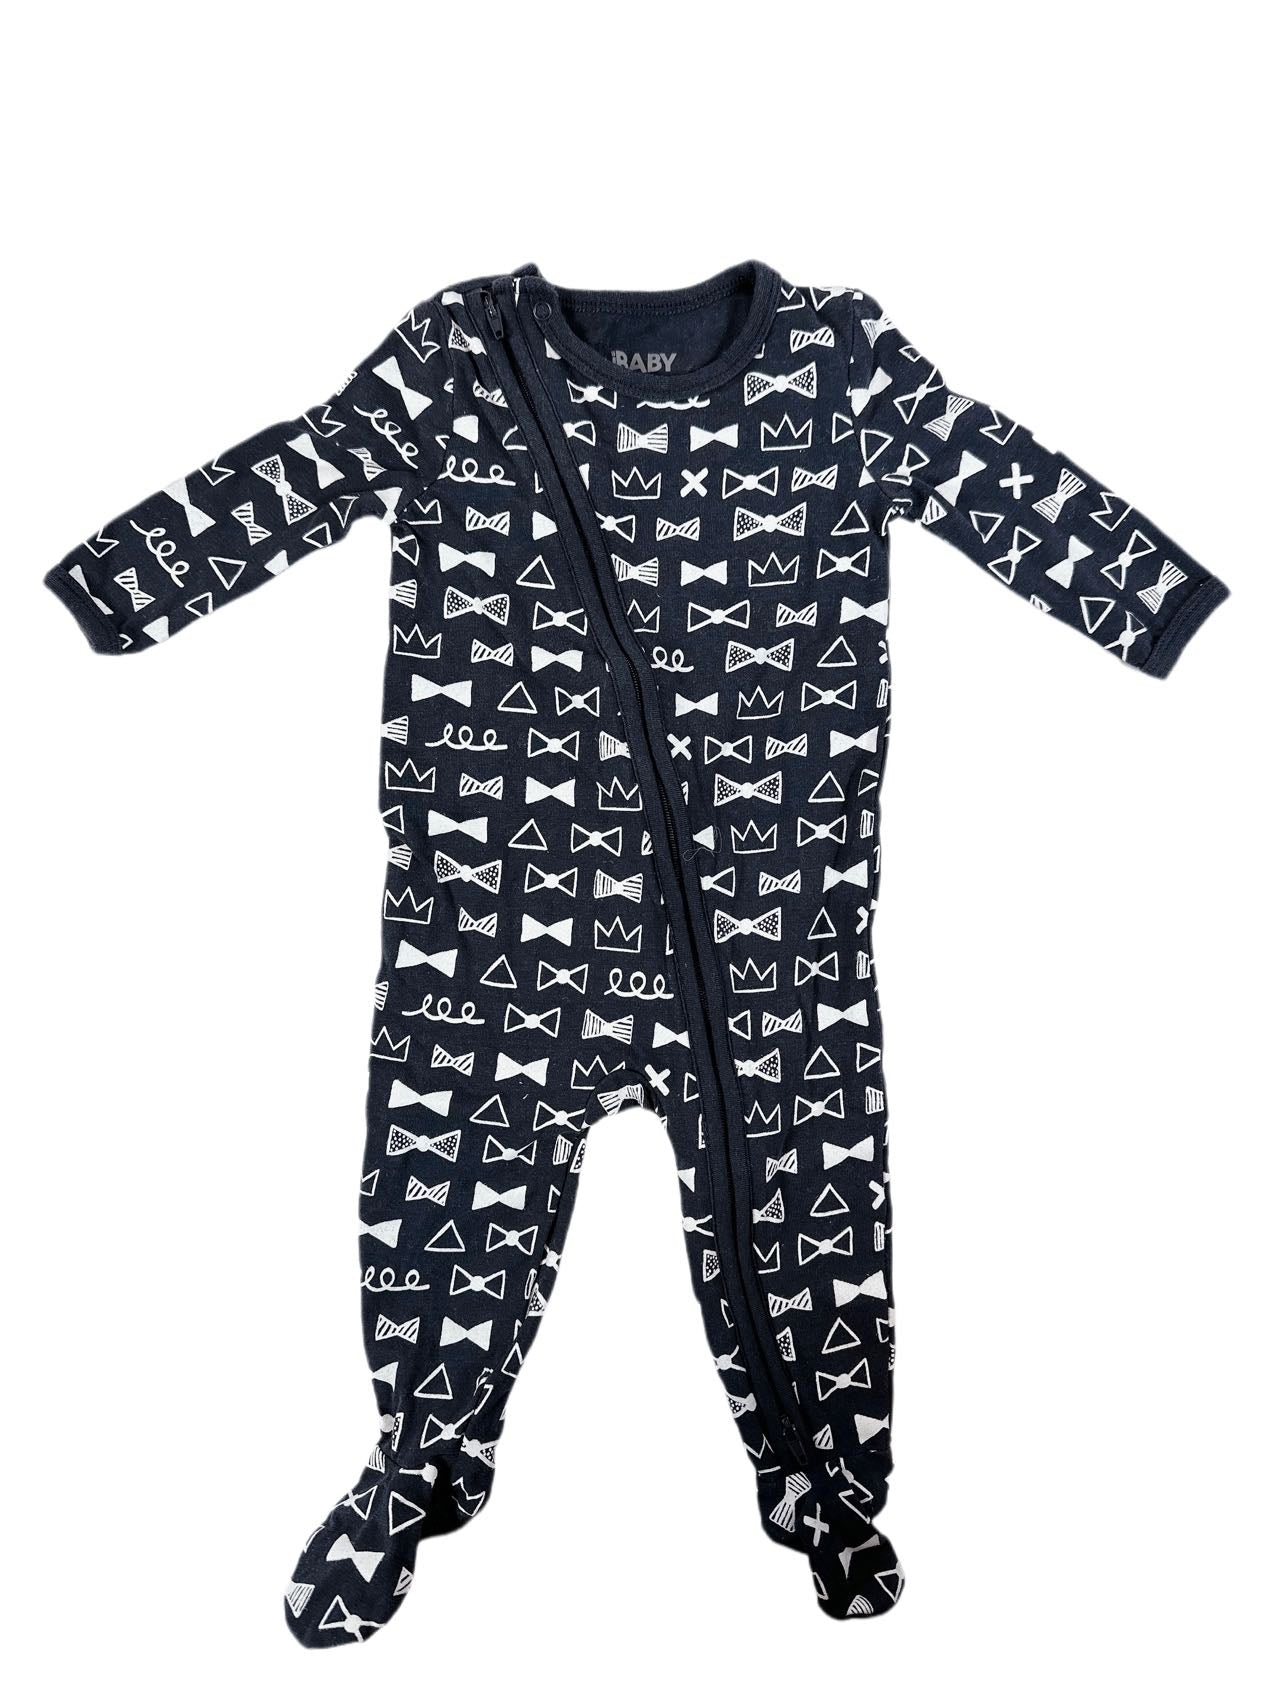 Baby Onepiece (3M)